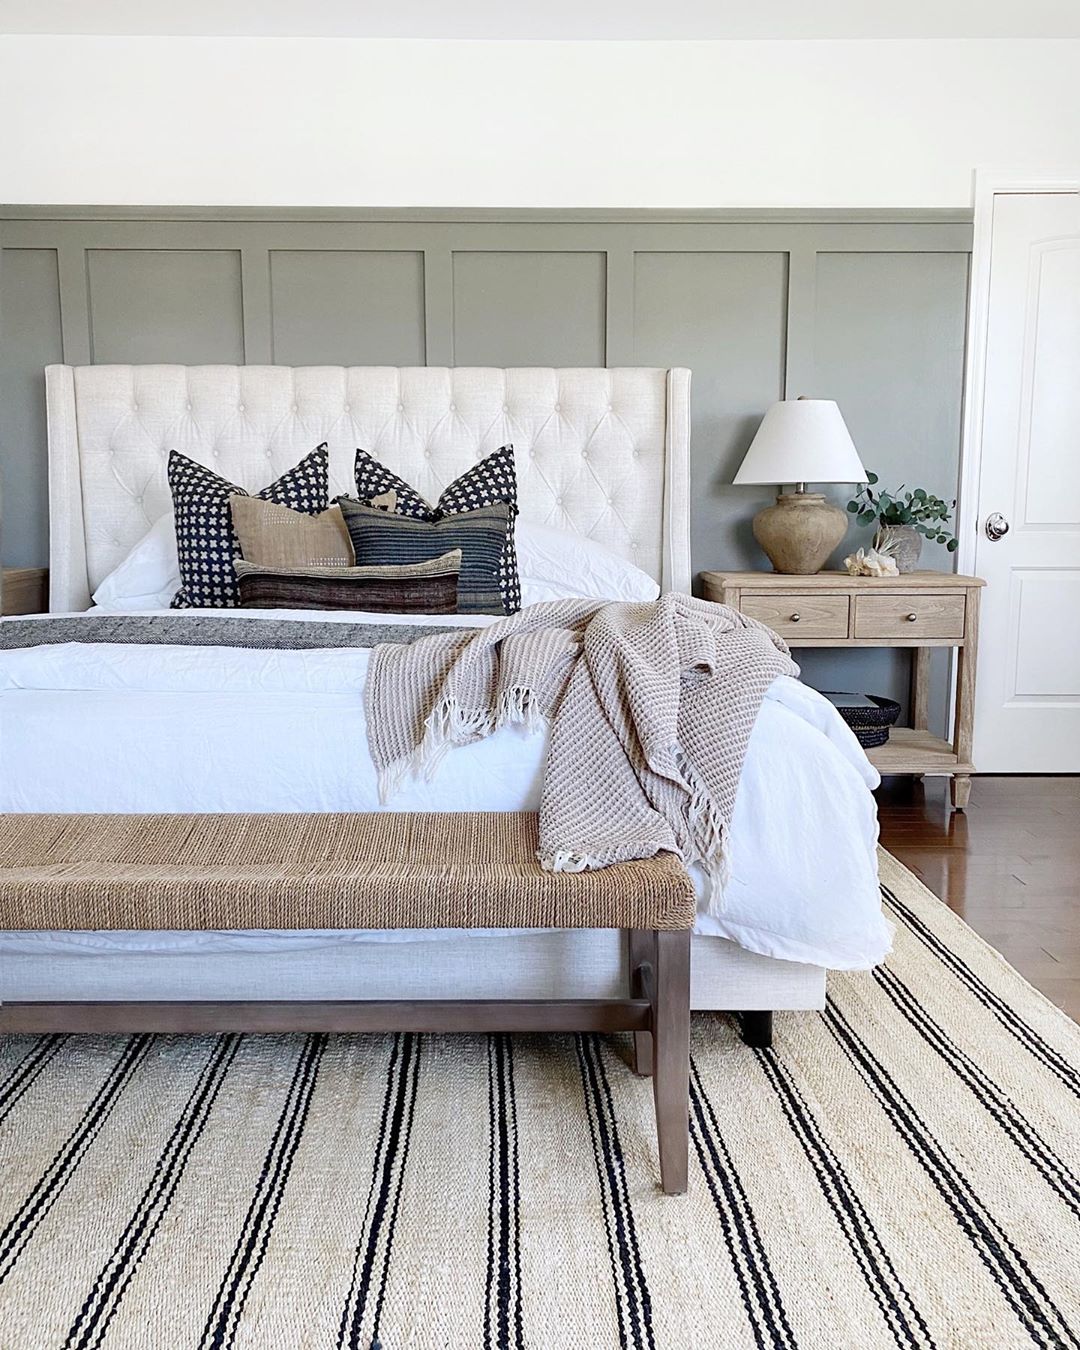 Neutral bedroom with patterned rug. Photo by Instagram user @theheartandhaven